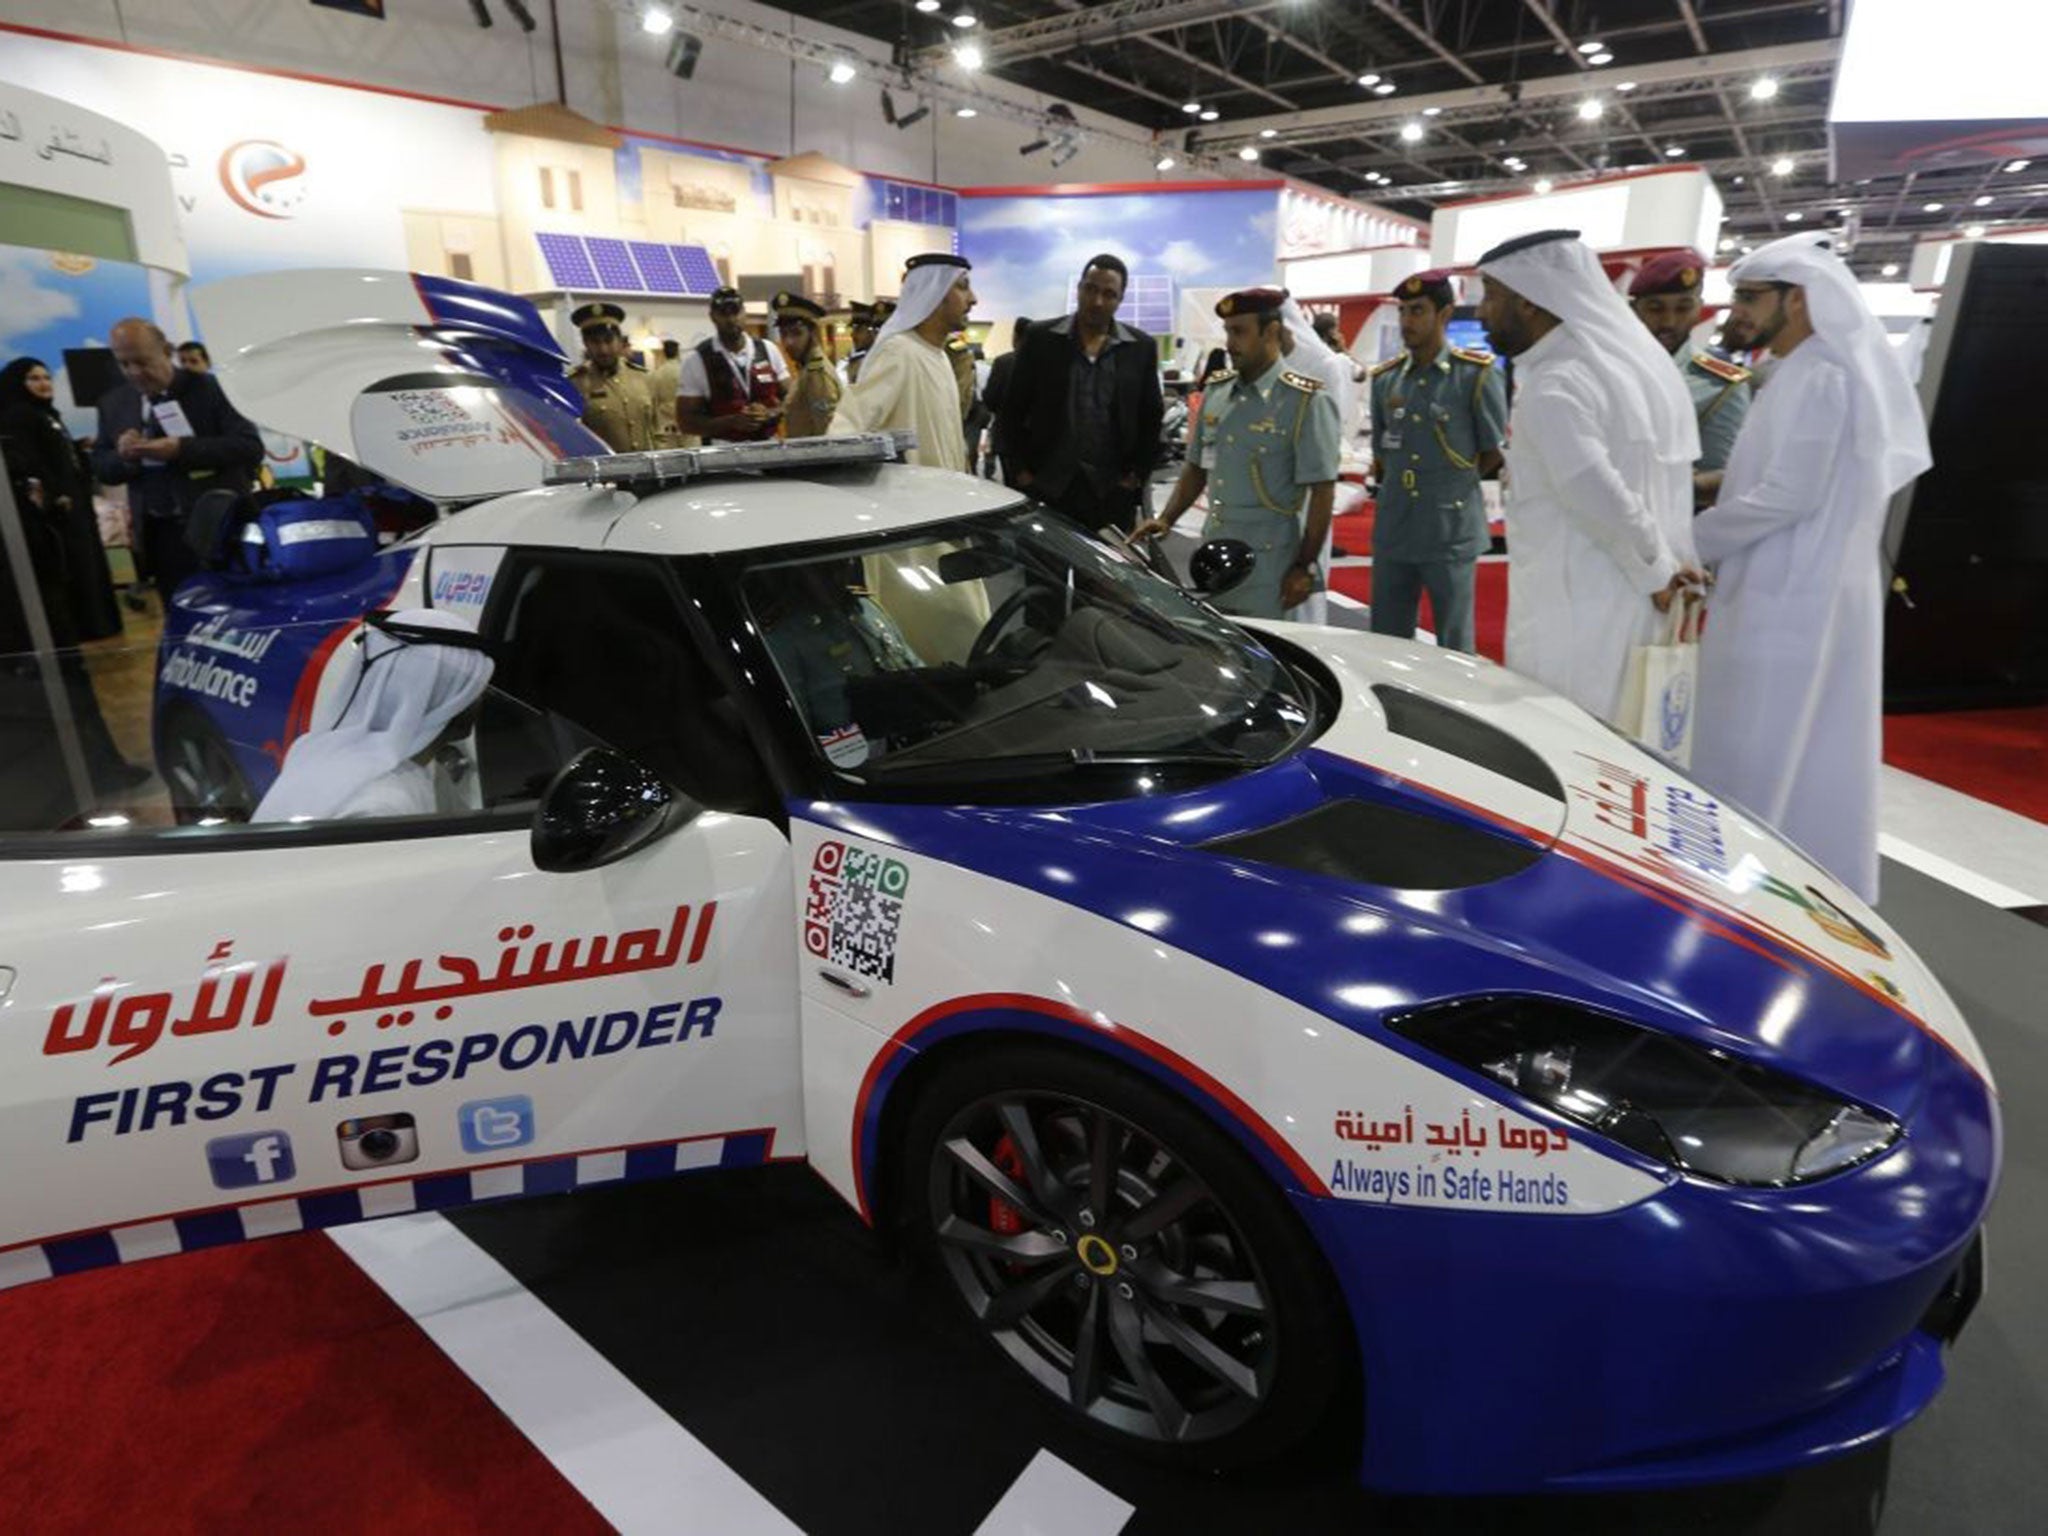 Visitors look at a first responder Lotus car at the Gitex Technology week in Dubai on October 15